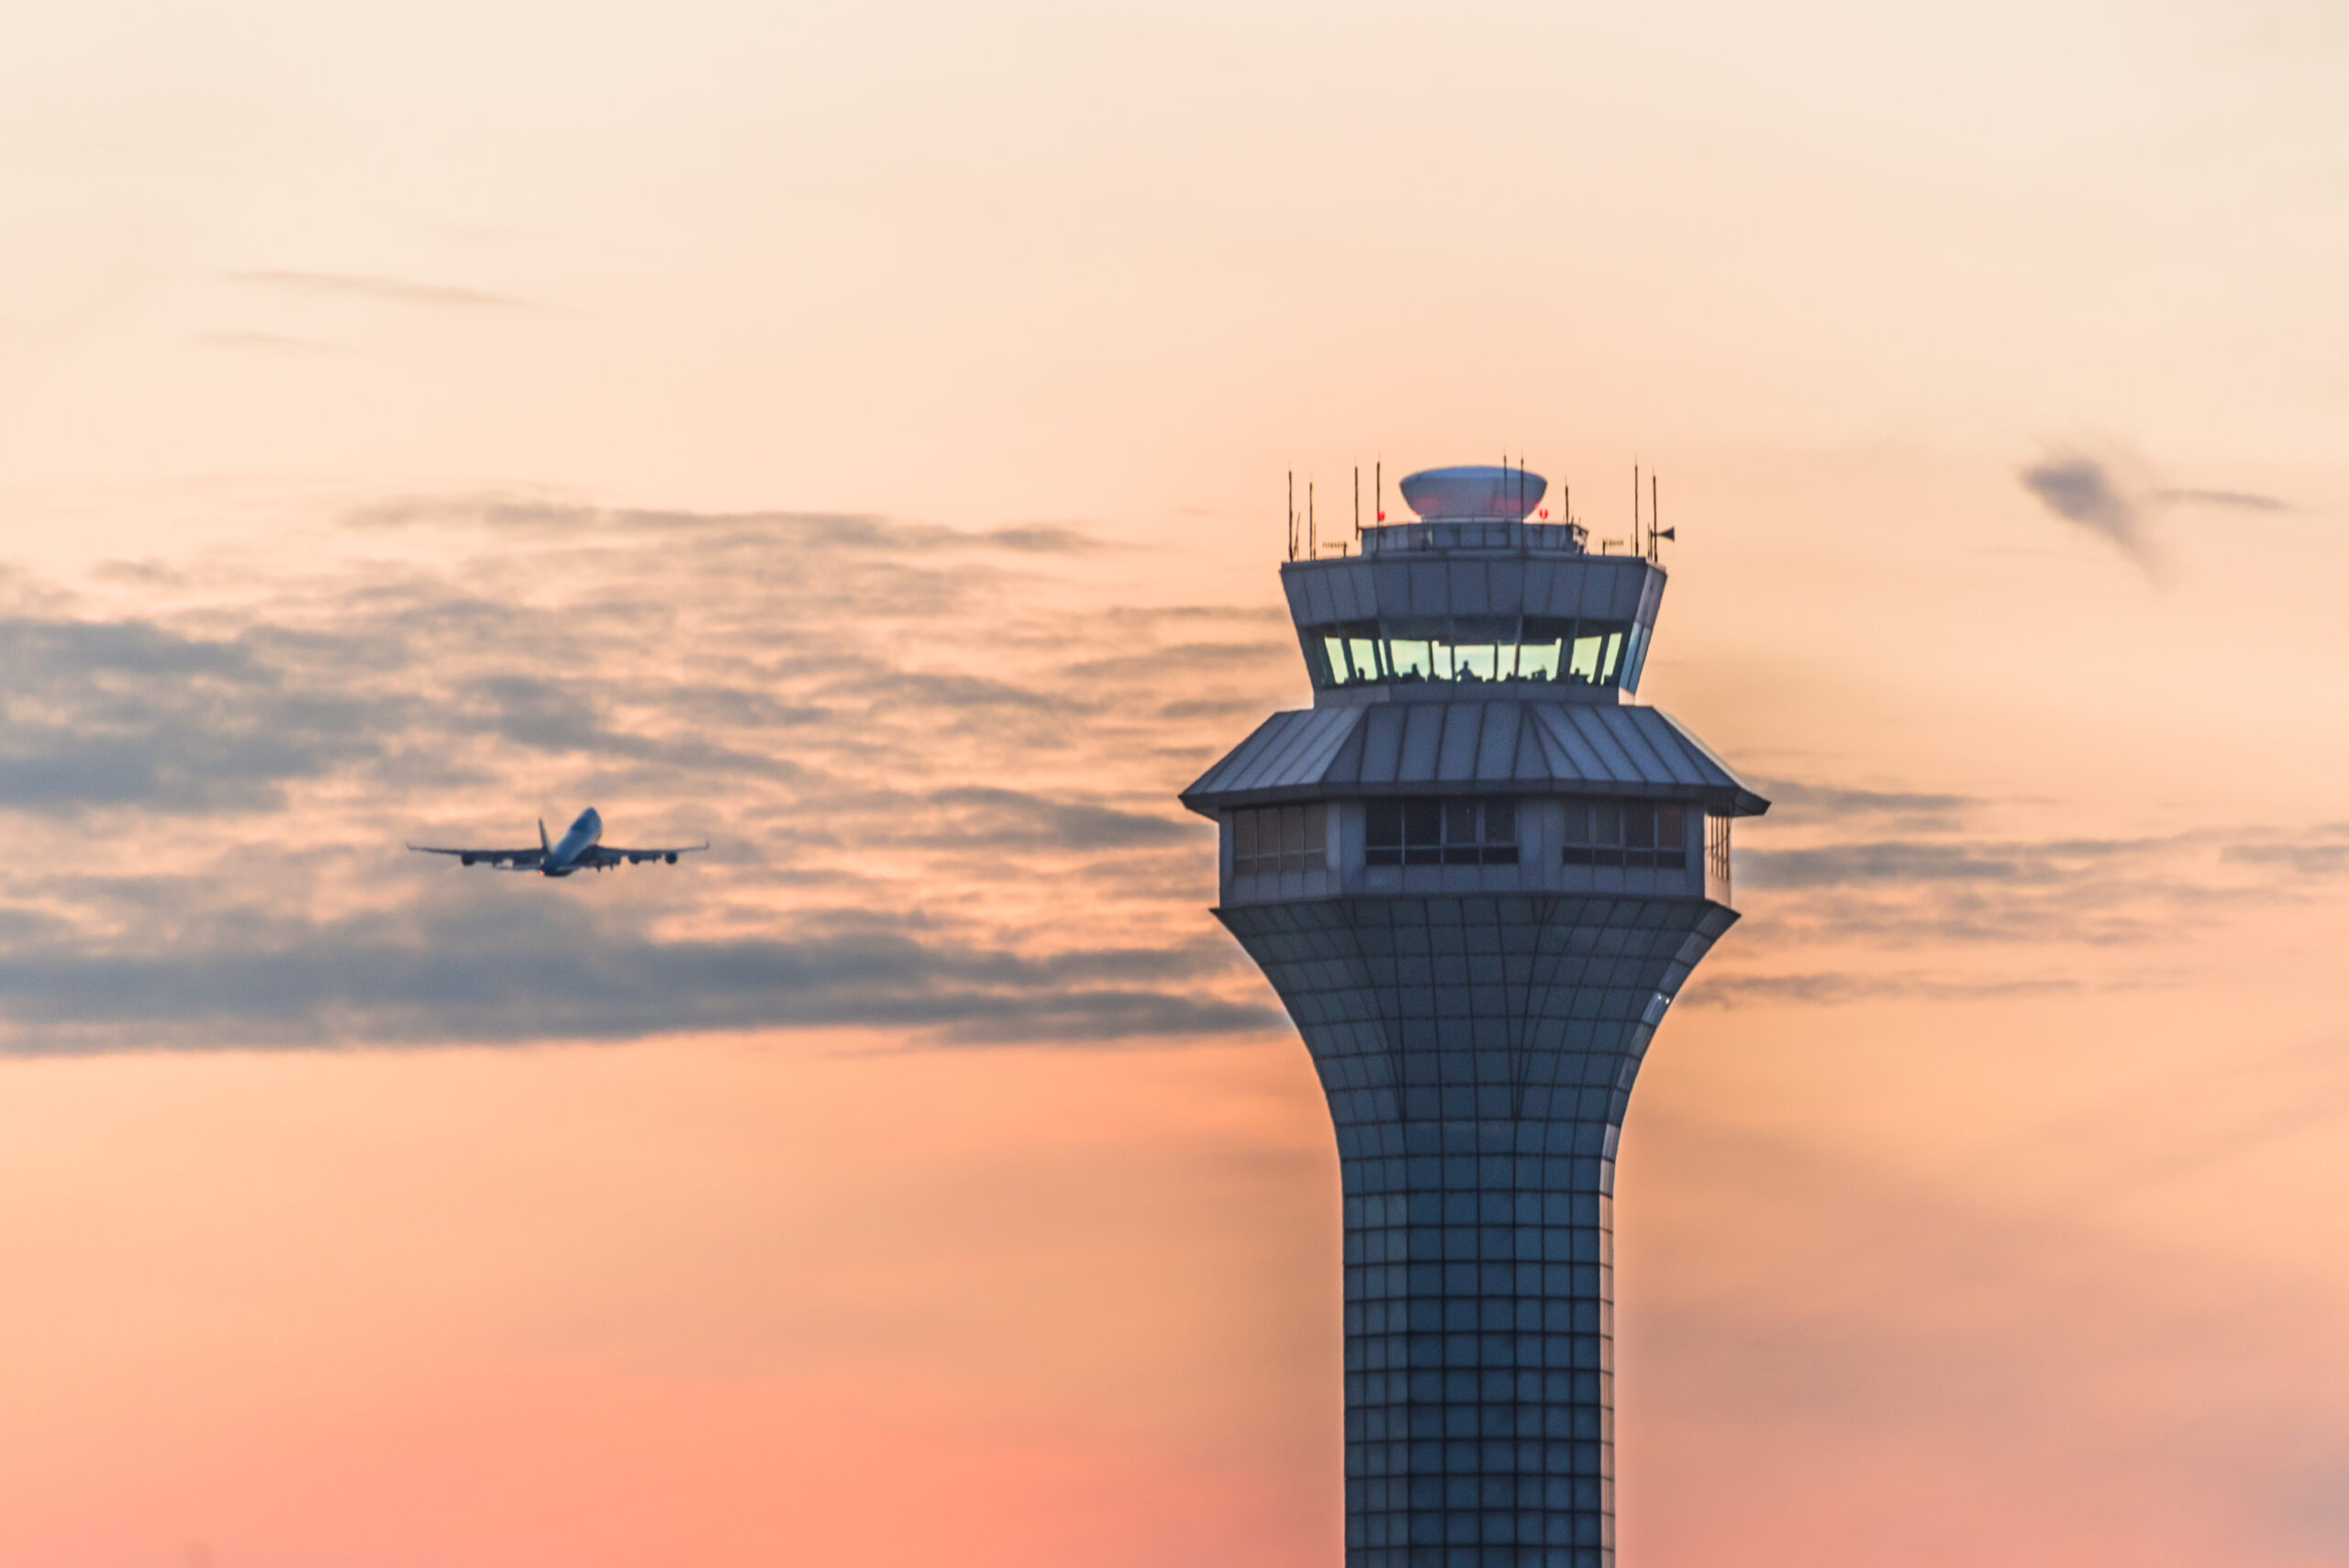 Airport traffic control tower